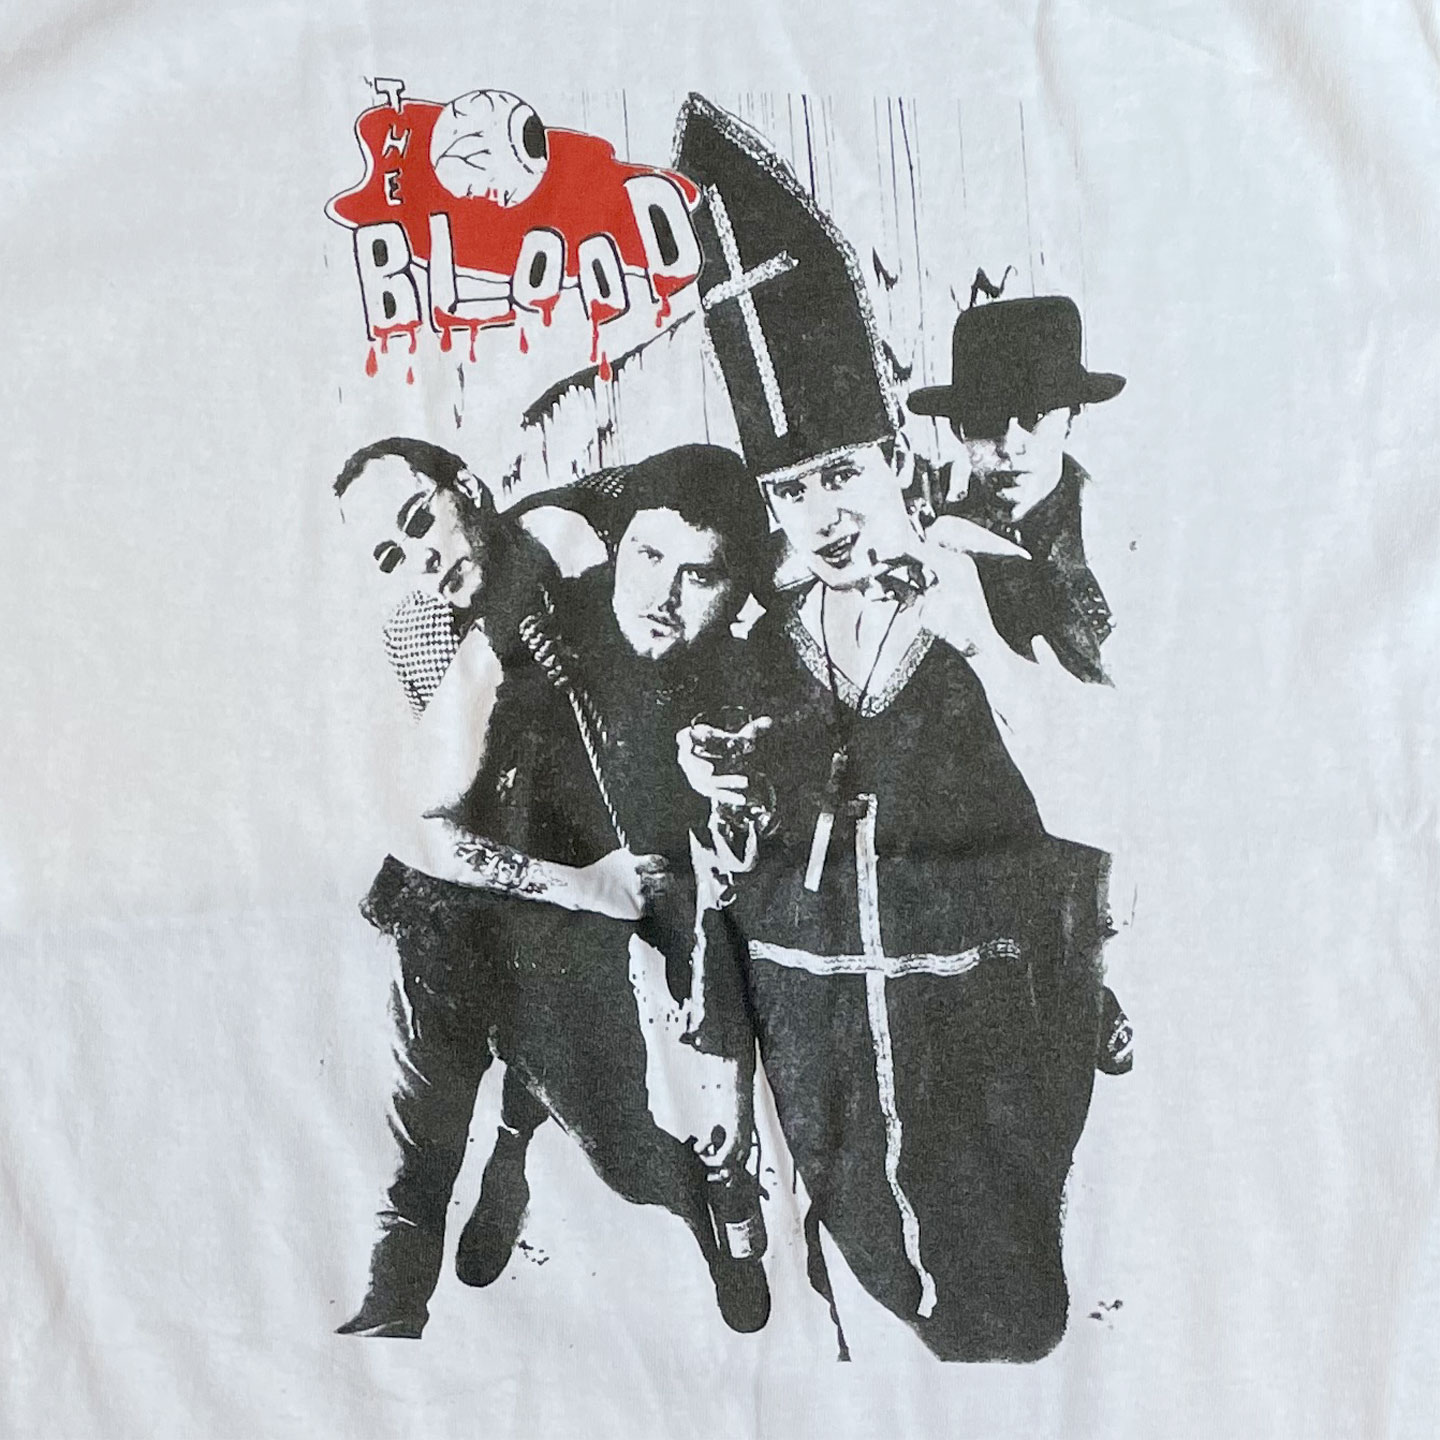 THE BLOOD Tシャツ megalomania